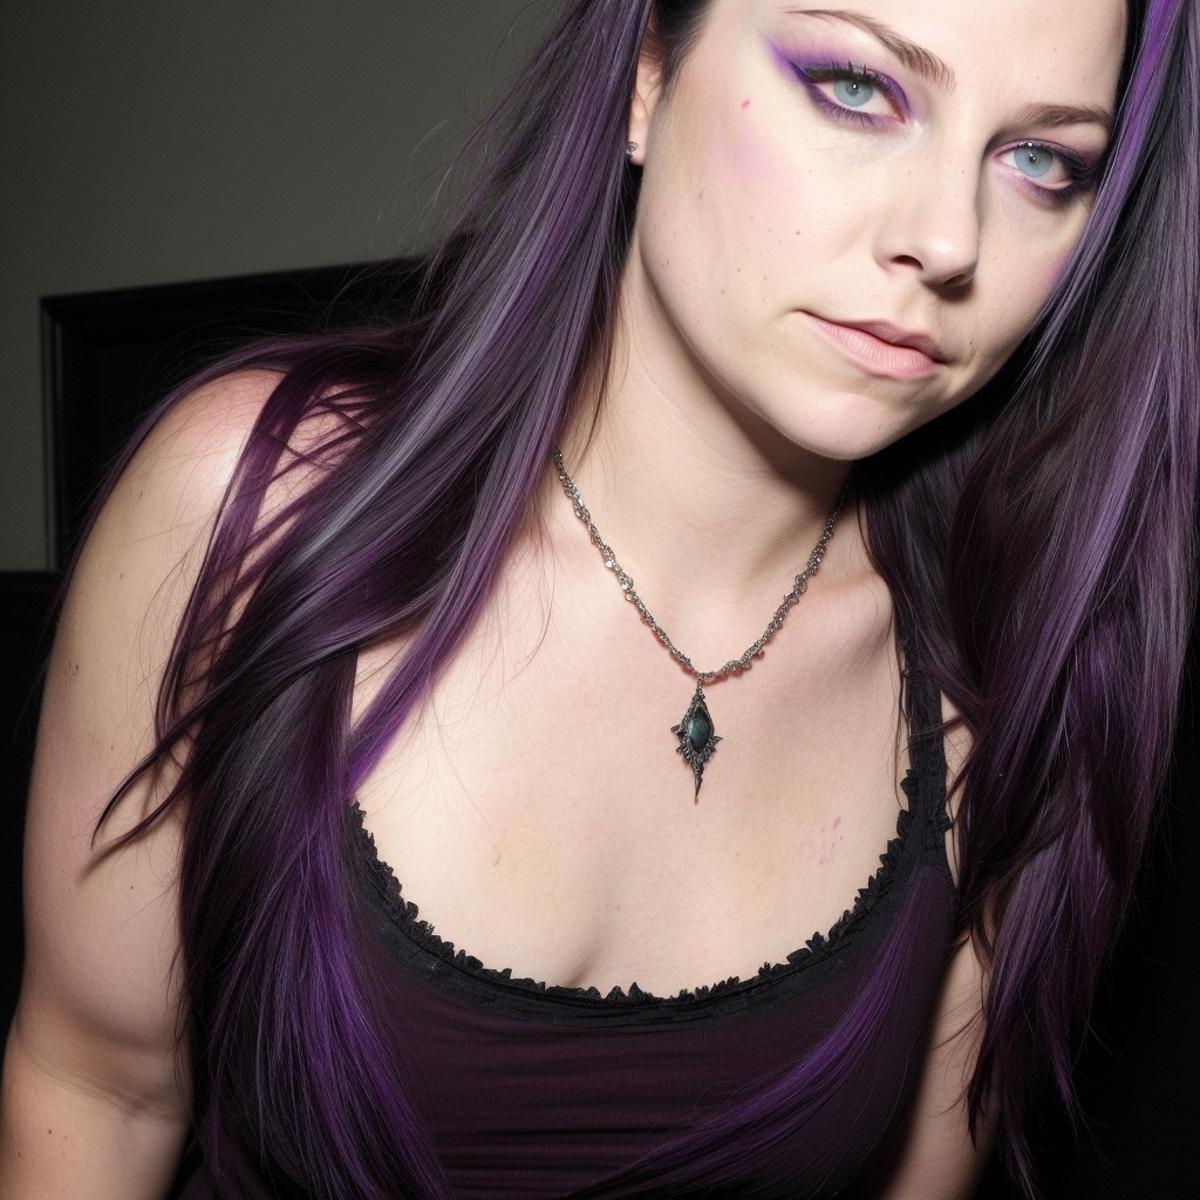 Amy Lee image by iolmstead23